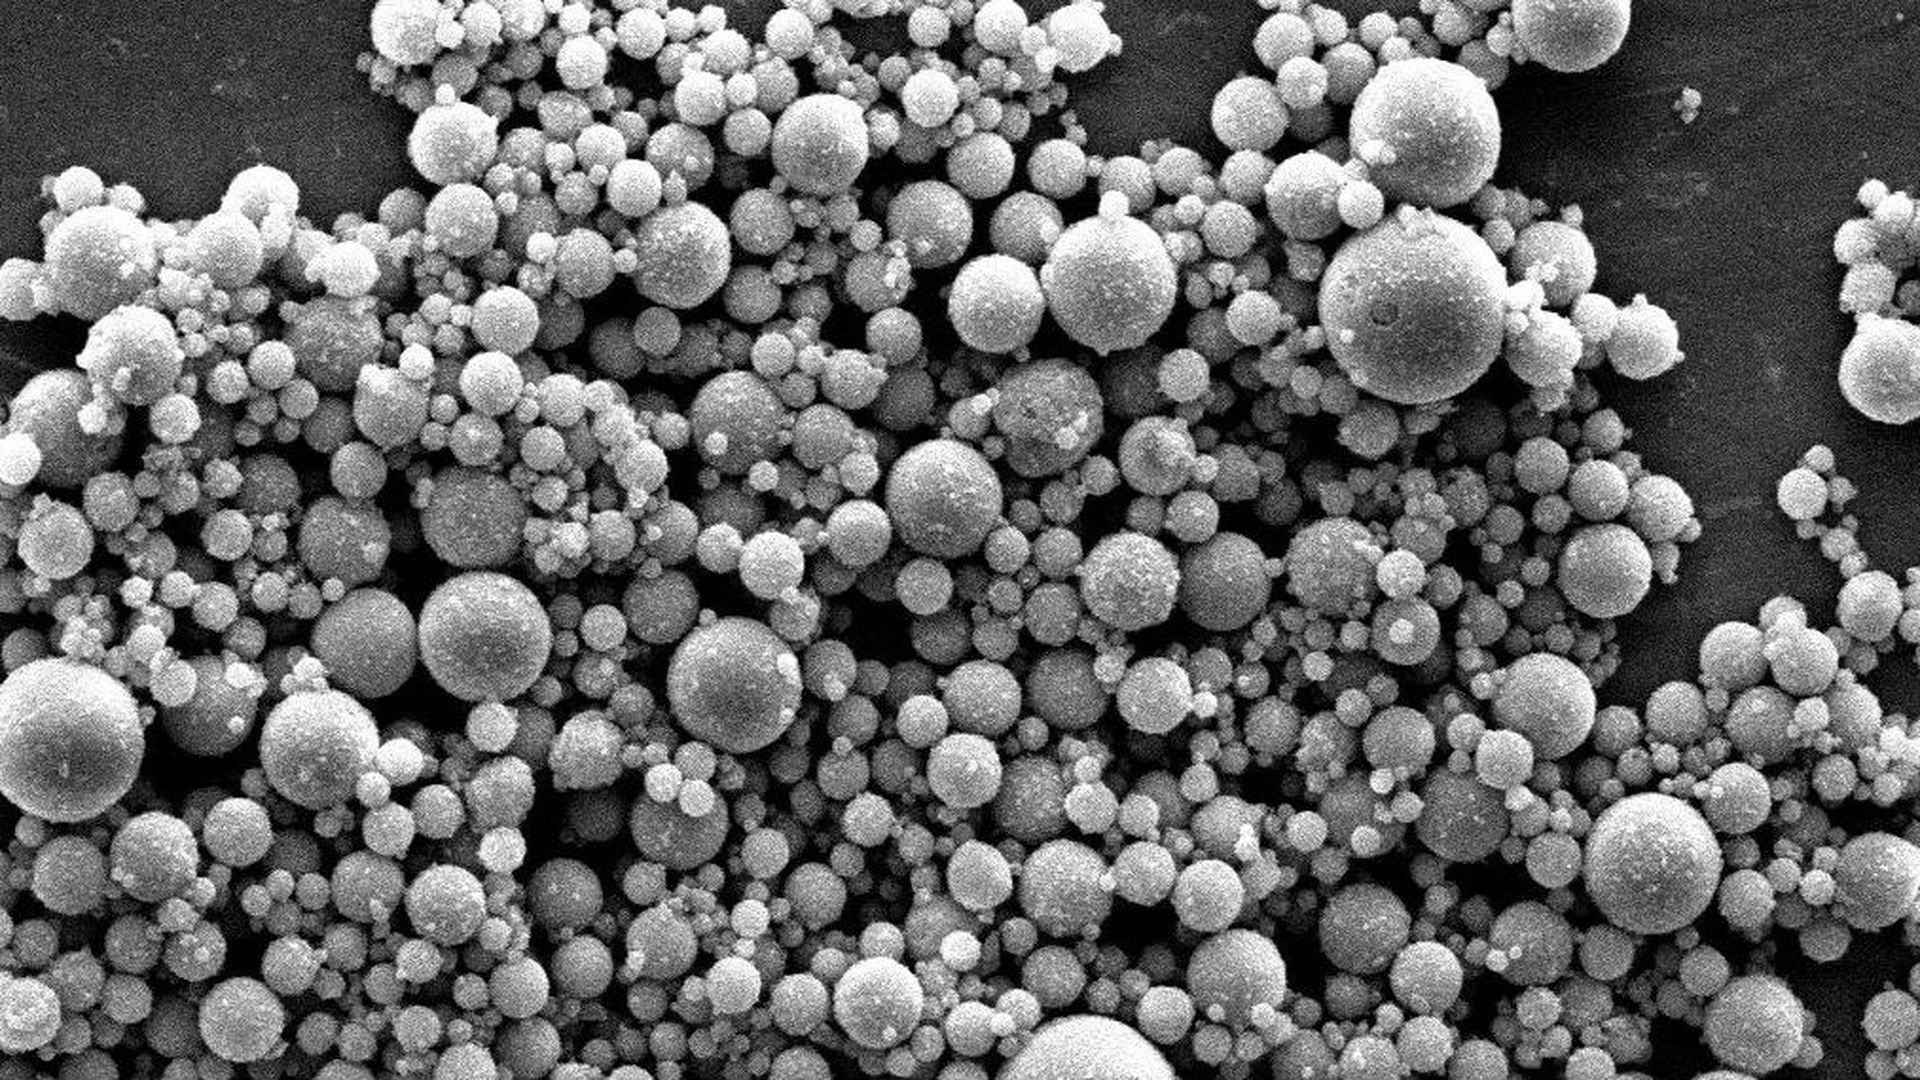 Microparticles have been invented that can self-assemble into large structures